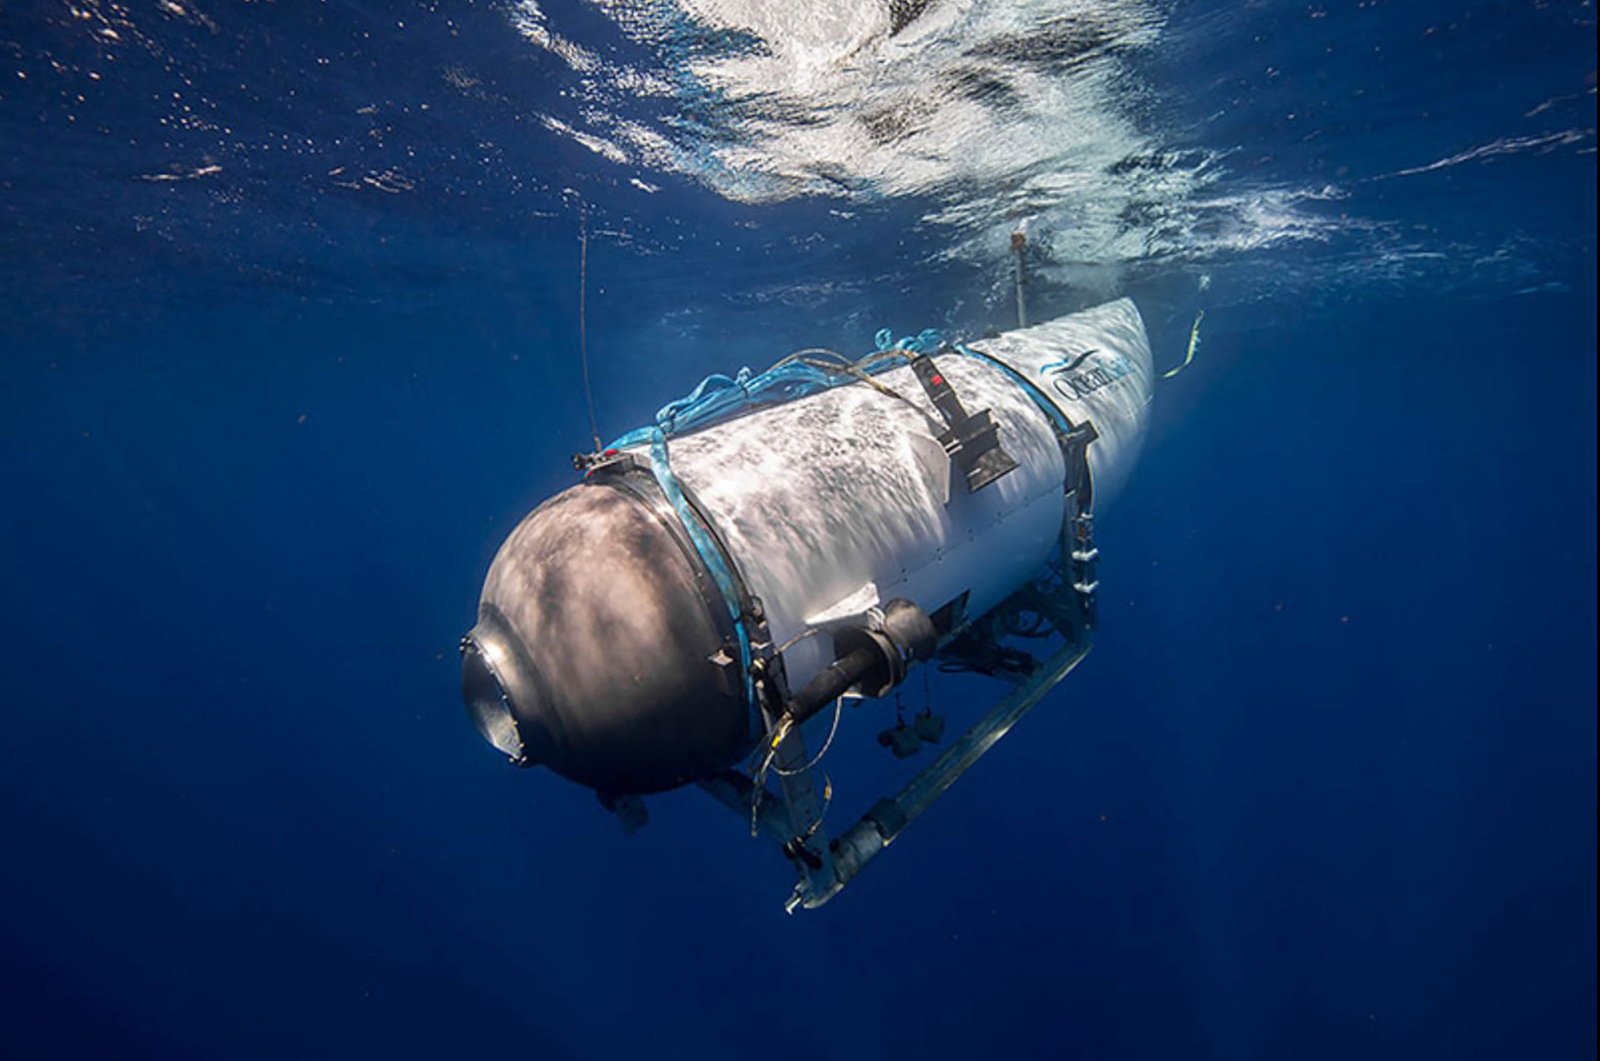 This undated image shows the Titan submersible beginning a descent. (AFP via OceanGate Expeditions)